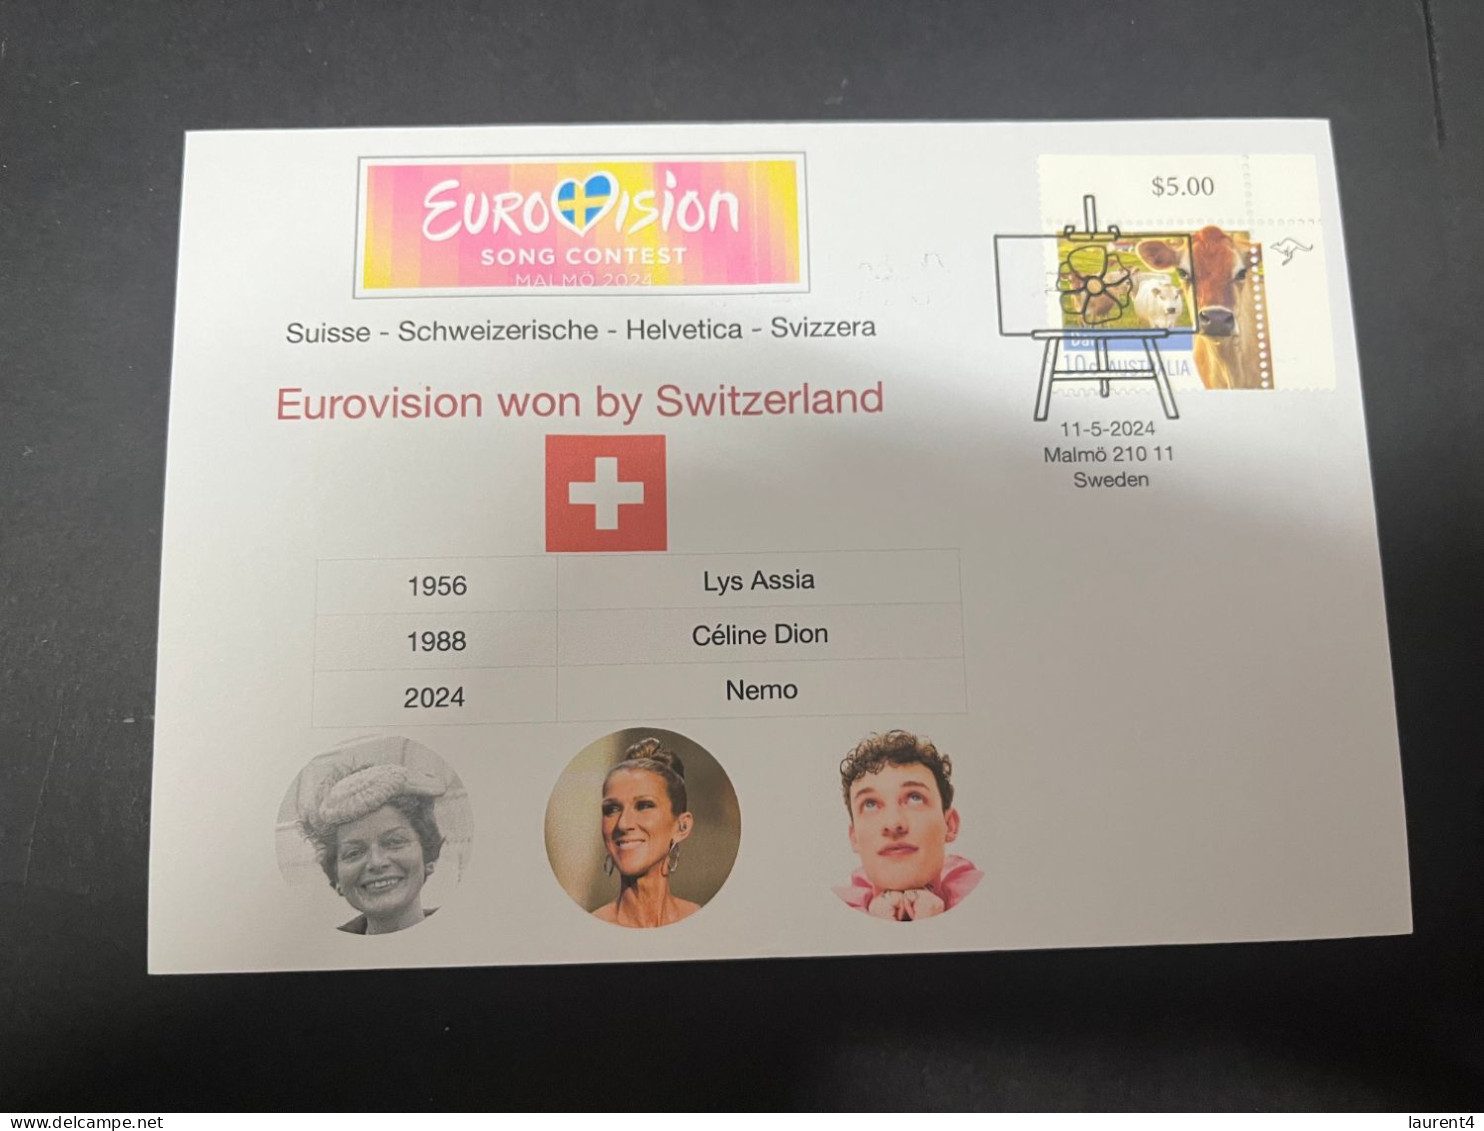 13-5-2024 (5 Z 2) Eurovision Song Contest 2024 - 1st (3rd Win For Switzerland) 1956 Lys Assia - 1988 Céline Dion - Música